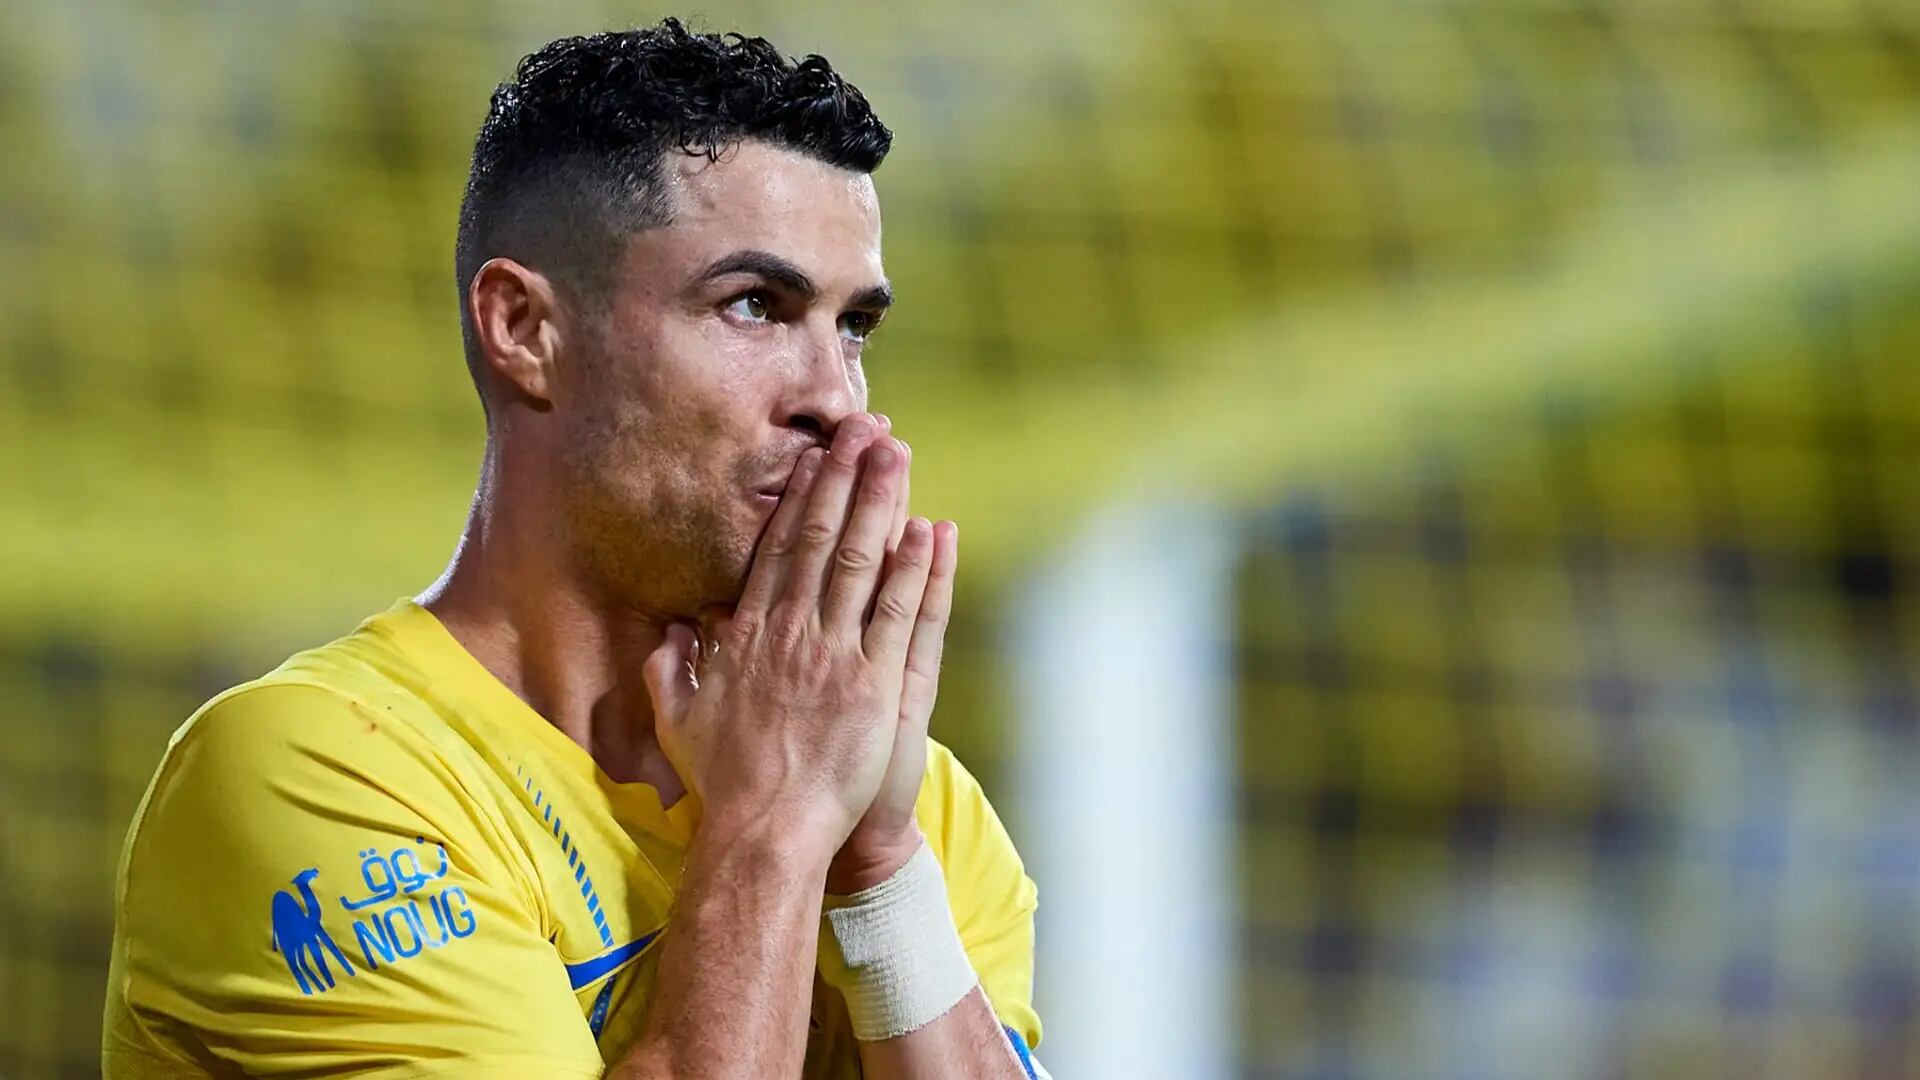 After his confirmed injury, Cristiano apologizes to all his fans in China